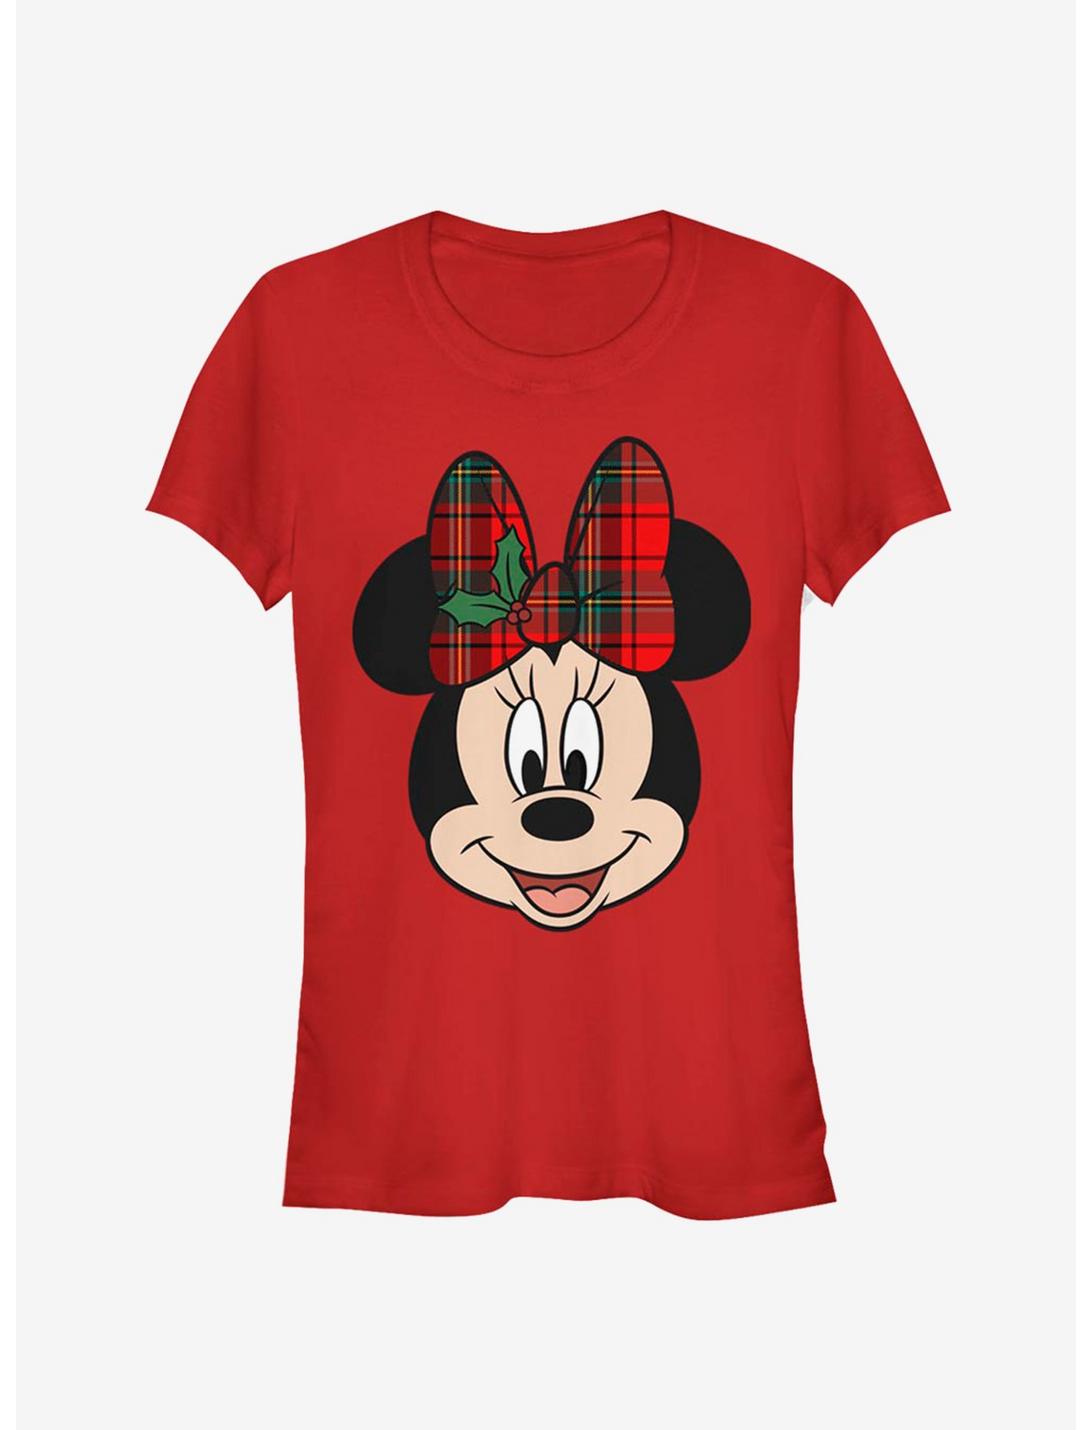 Disney Minnie Mouse Plaid Holiday Bow Classic Girls T-Shirt, RED, hi-res